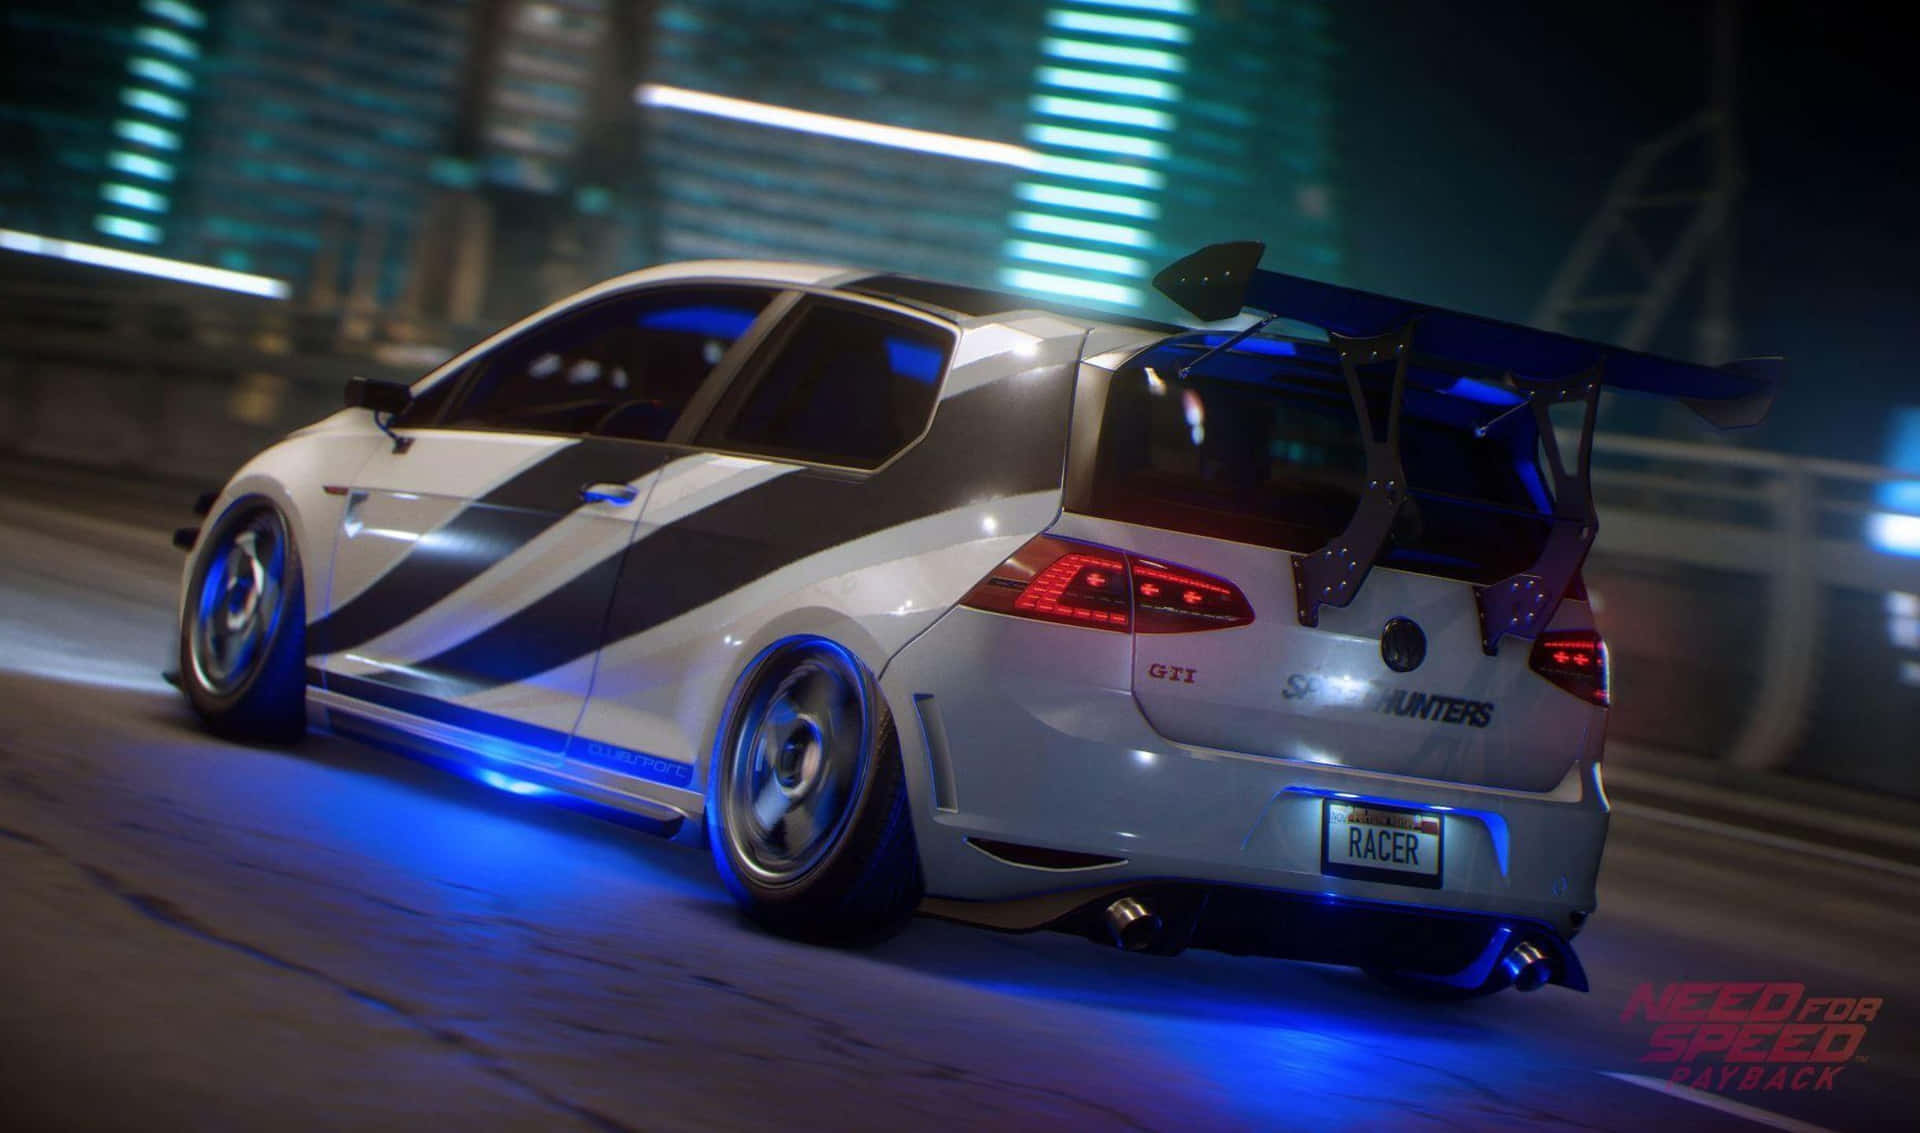 Take on the Hollywood-style heists with Need for Speed Payback.